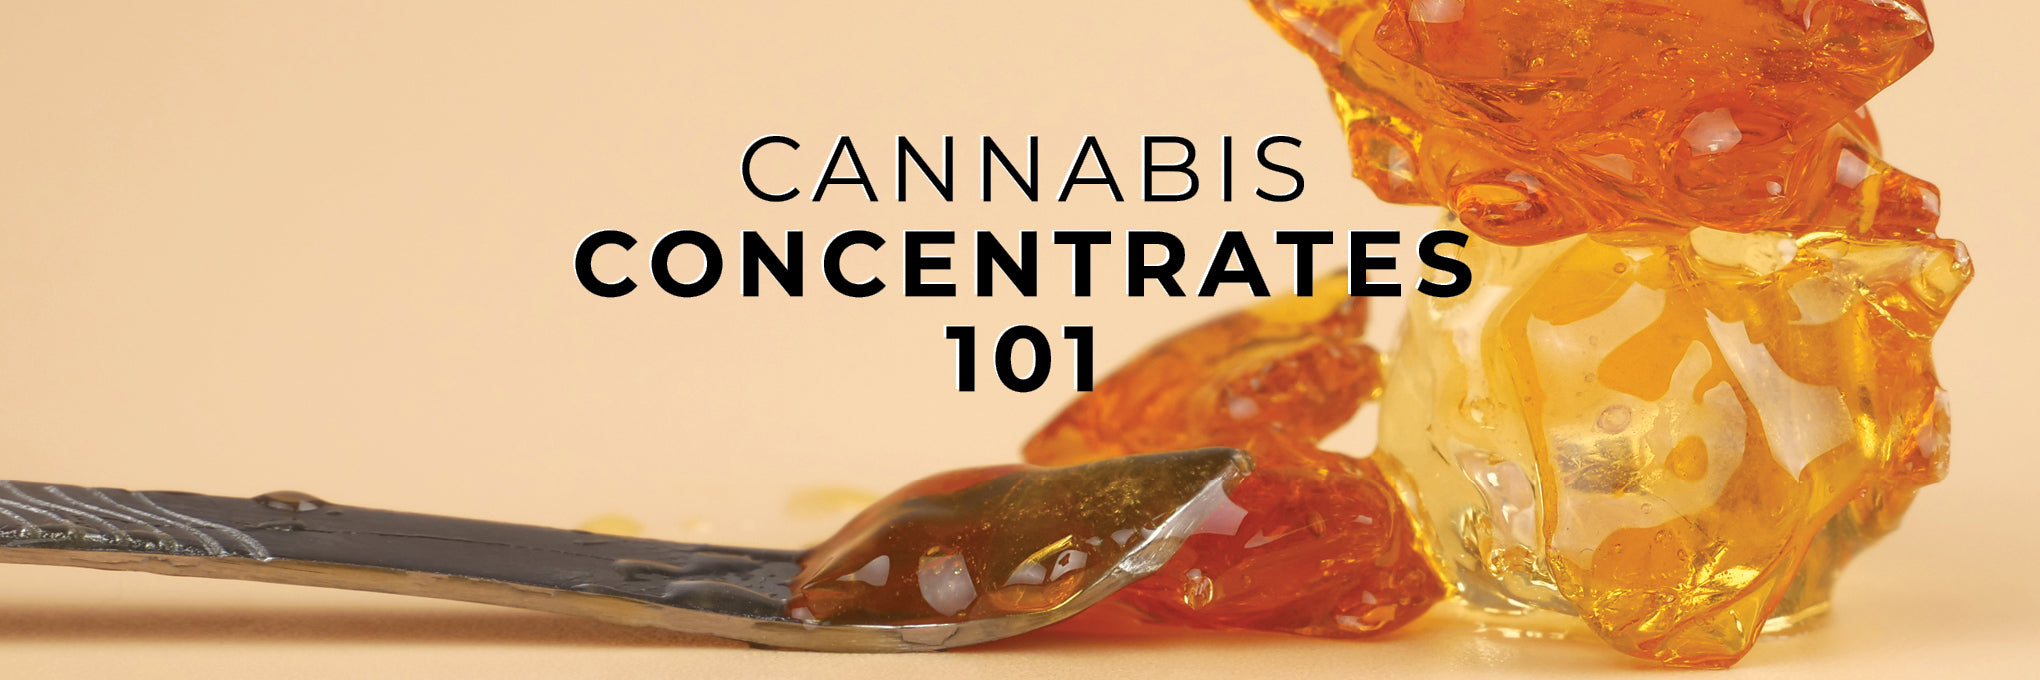 Cannabis Concentrates 101, Extracting the Facts on Inhalable Concentrates